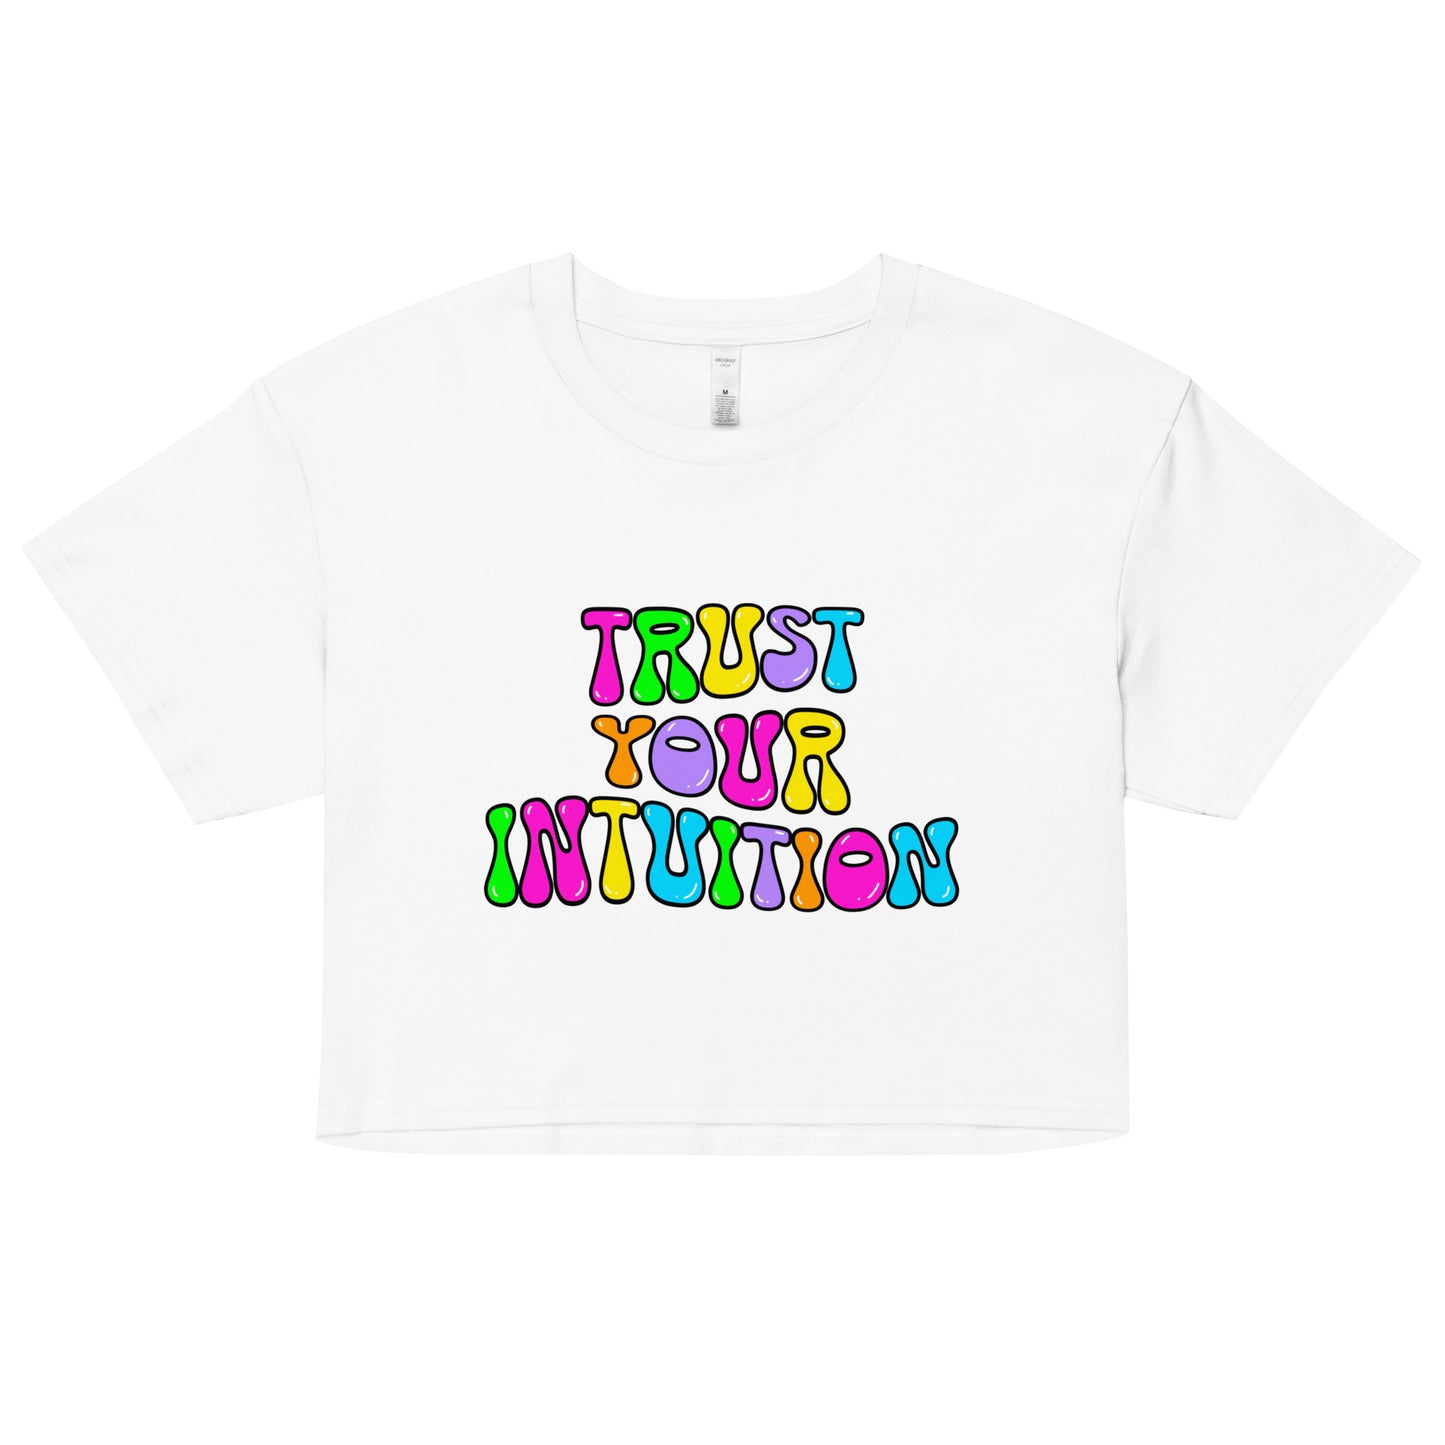 Trust Your Intuition Crop Top